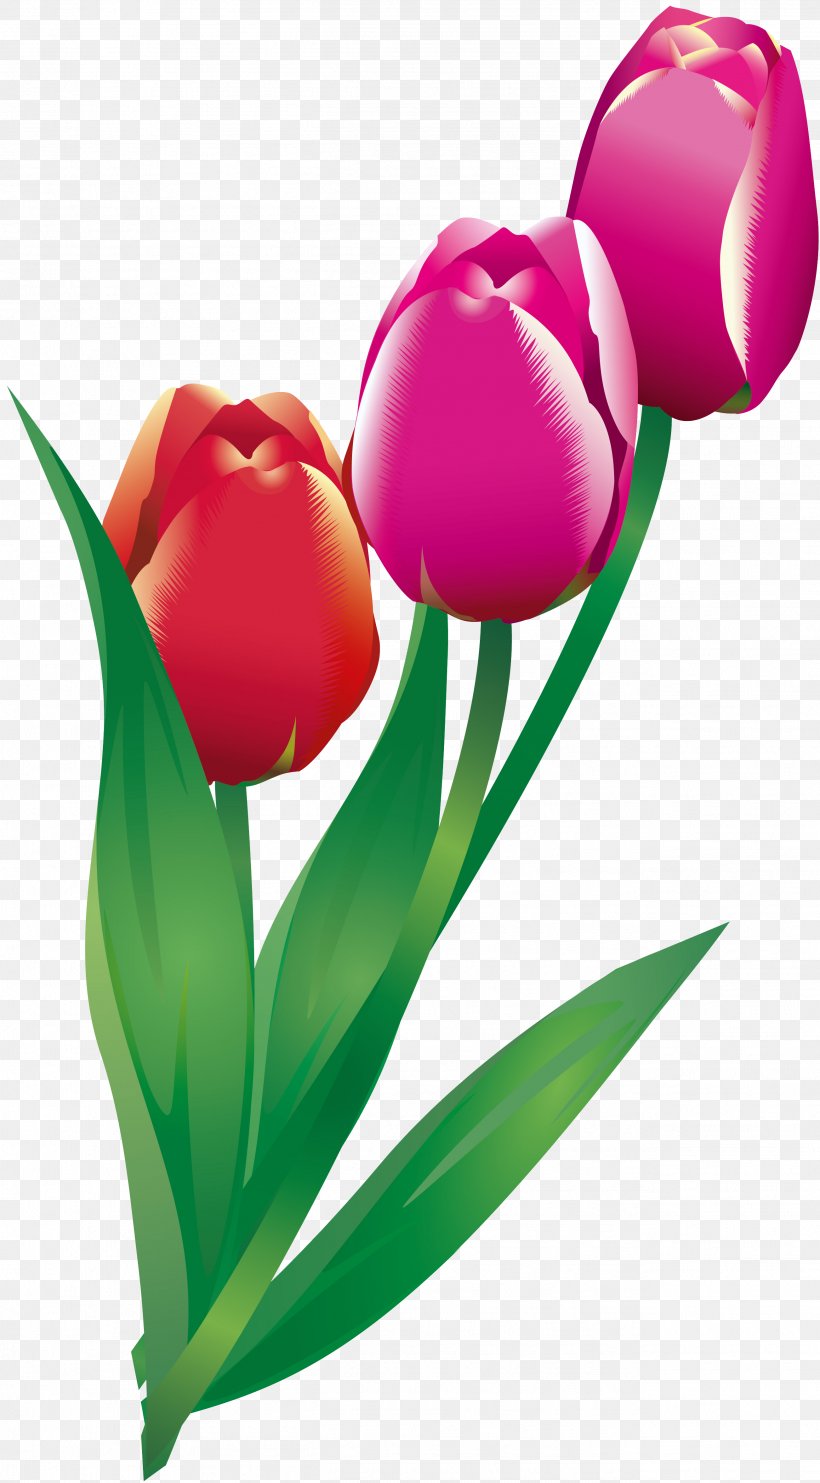 Cut Flowers Tulip Flowering Plant, PNG, 2604x4710px, Flower, Cut Flowers, Family, Flower Bouquet, Flowering Plant Download Free